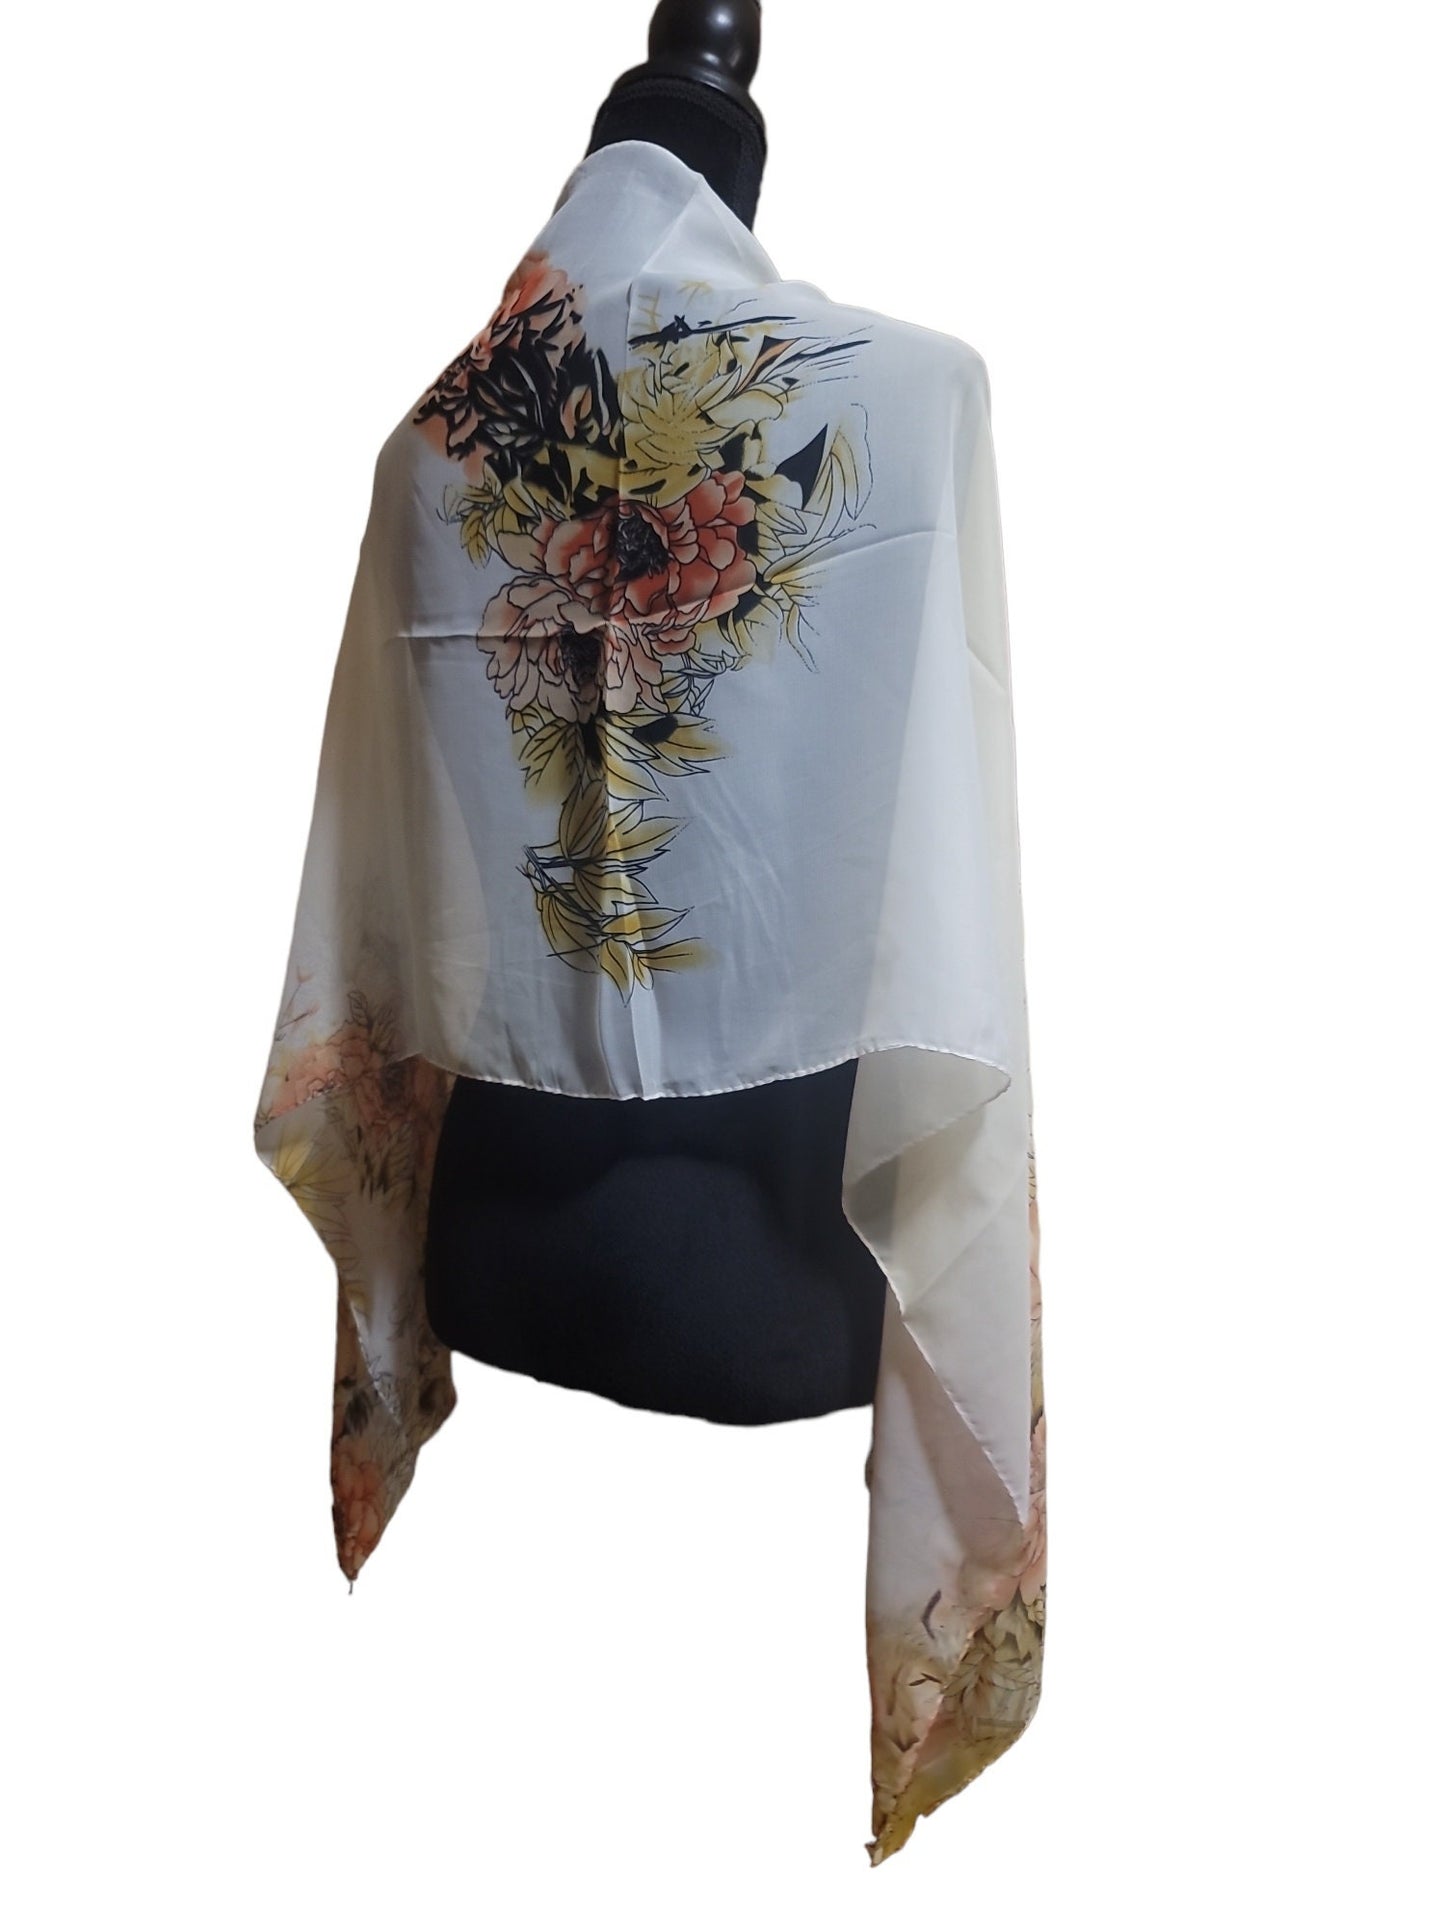 Floral scarf wrap flowers